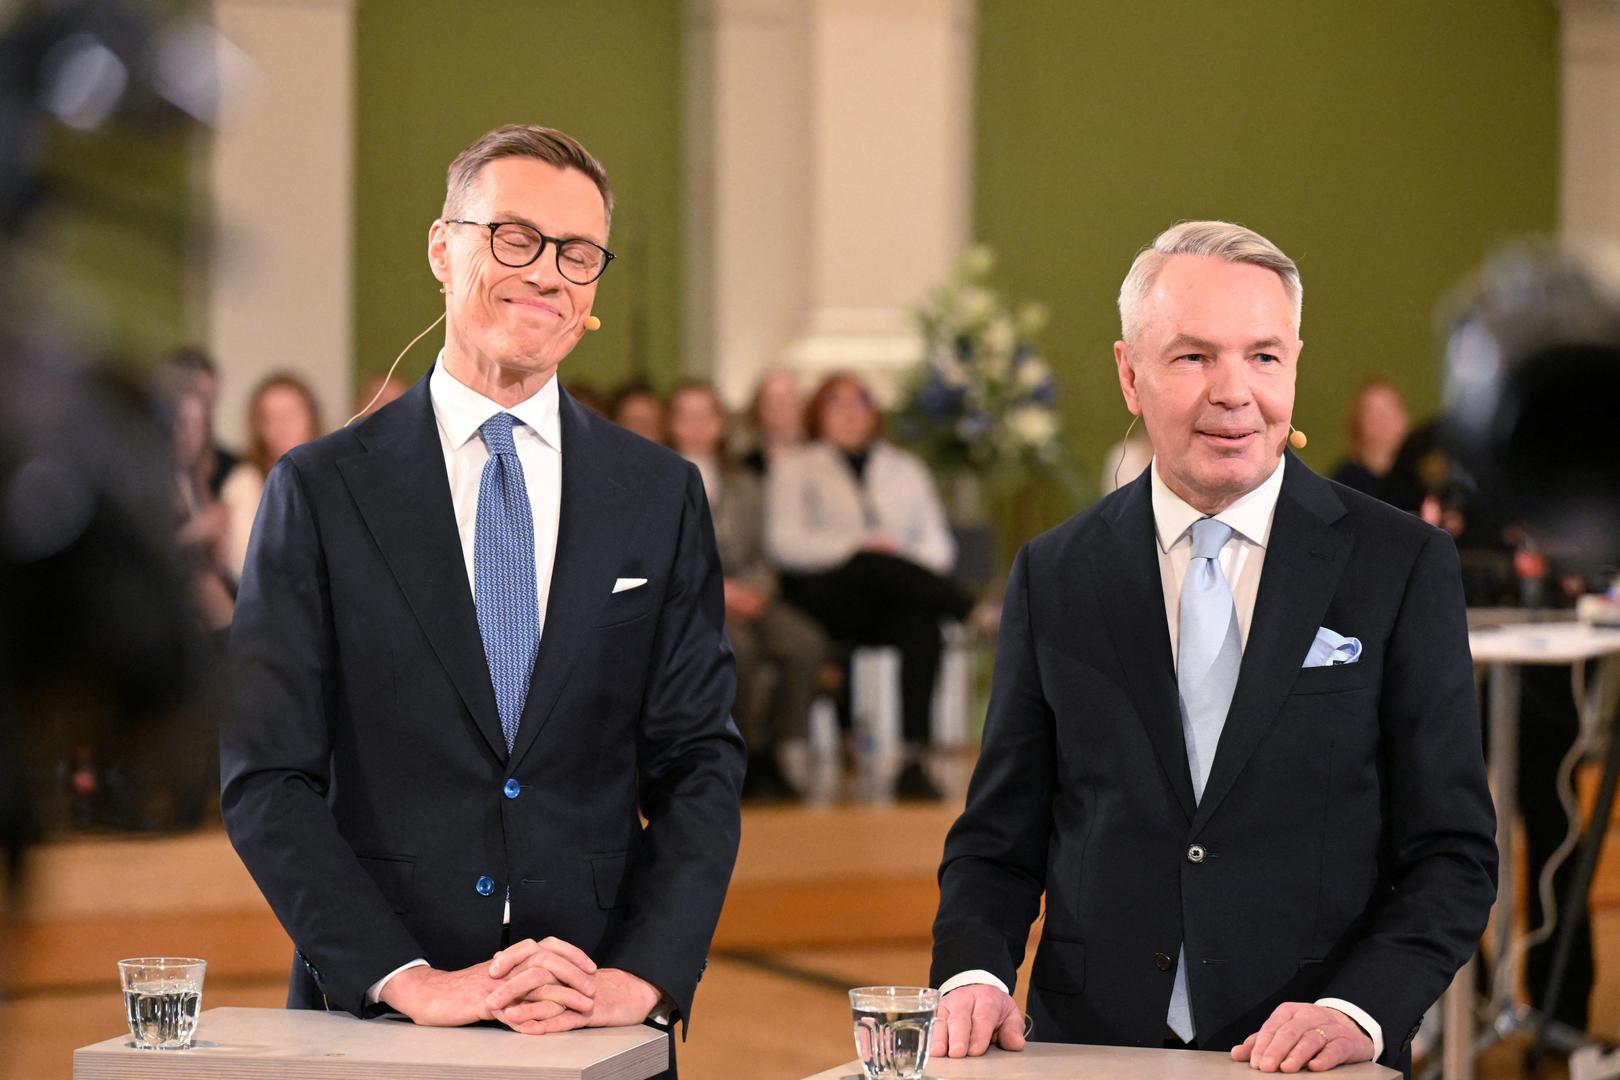 National Coalition Party (NCP) presidential candidate Alexander Stubb and  Green Party backed candidate for a nonpartisan constituency association Pekka Haavisto attend an election night event at the Helsinki City Hall in Helsinki, Finland, February 11, 2024. Lehtikuva/Jussi Nukari via REUTERS ATTENTION EDITORS - THIS IMAGE WAS PROVIDED BY A THIRD PARTY. NO THIRD PARTY SALES. NOT FOR USE BY REUTERS THIRD PARTY DISTRIBUTORS. FINLAND OUT. NO COMMERCIAL OR EDITORIAL SALES IN FINLAND. Photo: LEHTIKUVA/REUTERS